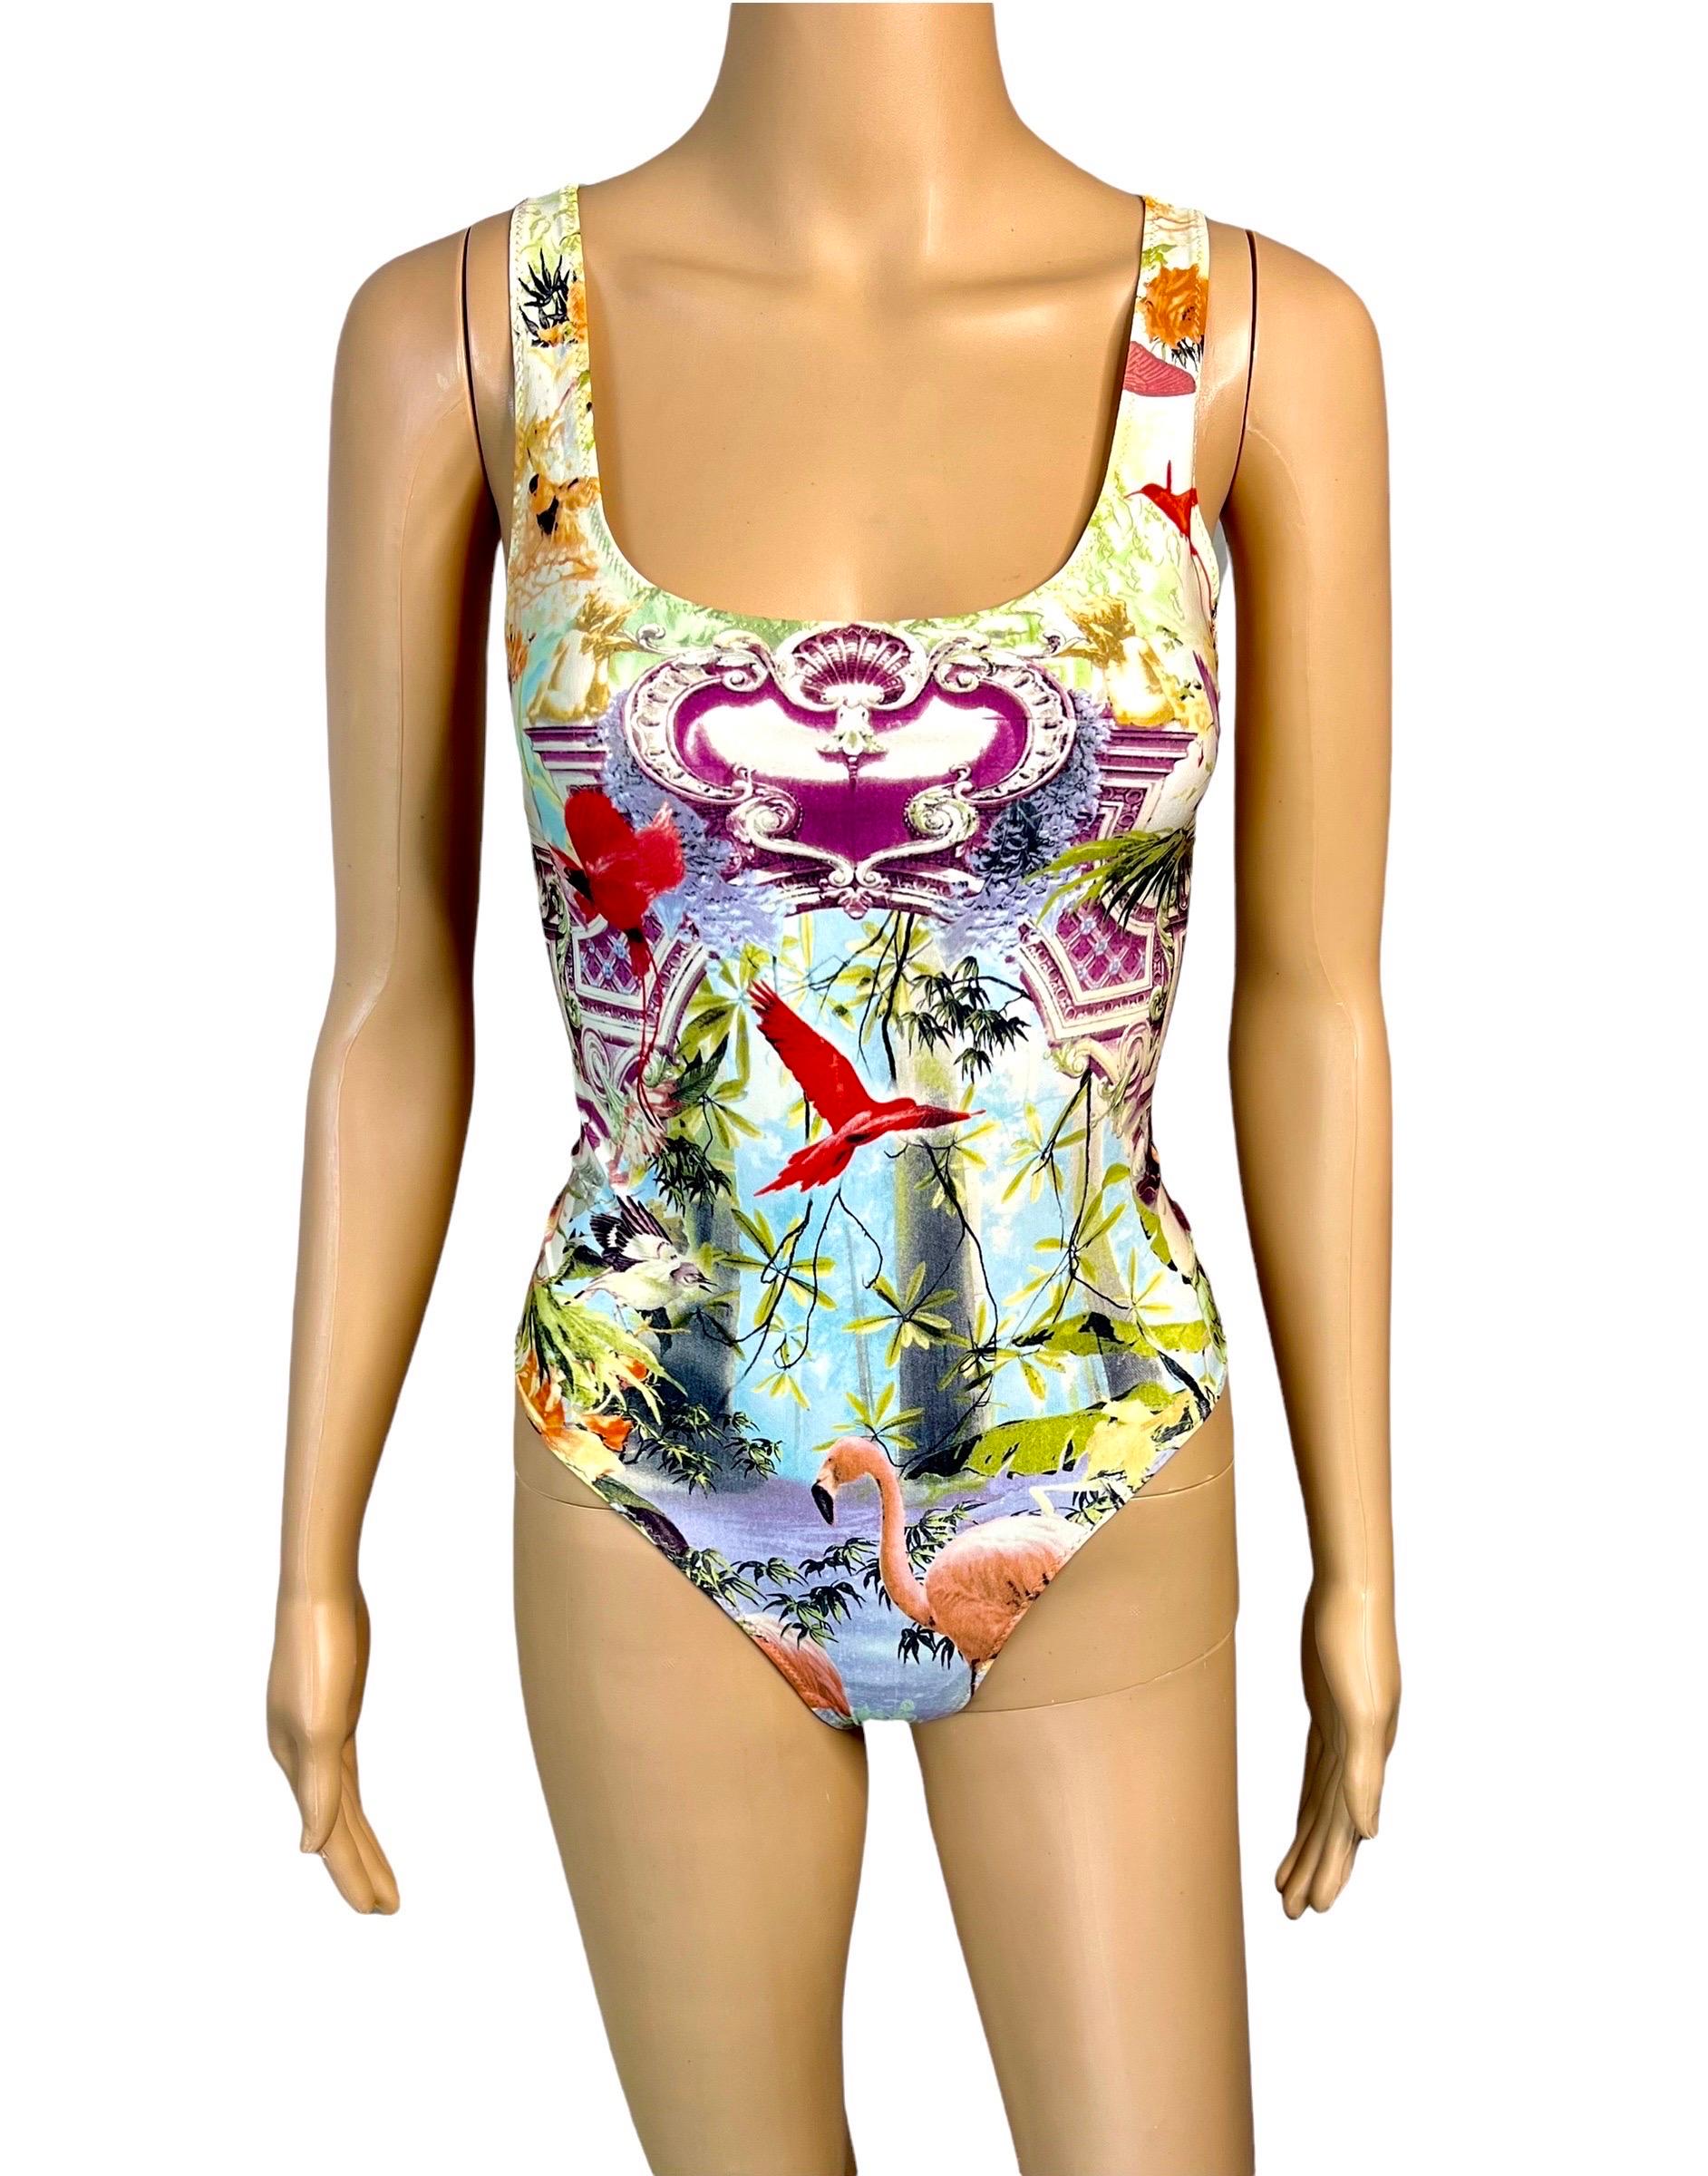 Jean Paul Gaultier Soleil S/S 1999 Flamingo Tropical Print Bodysuit One-Piece Swimwear Swimsuit 

Excellent Condition. Please note size tag has been removed.

